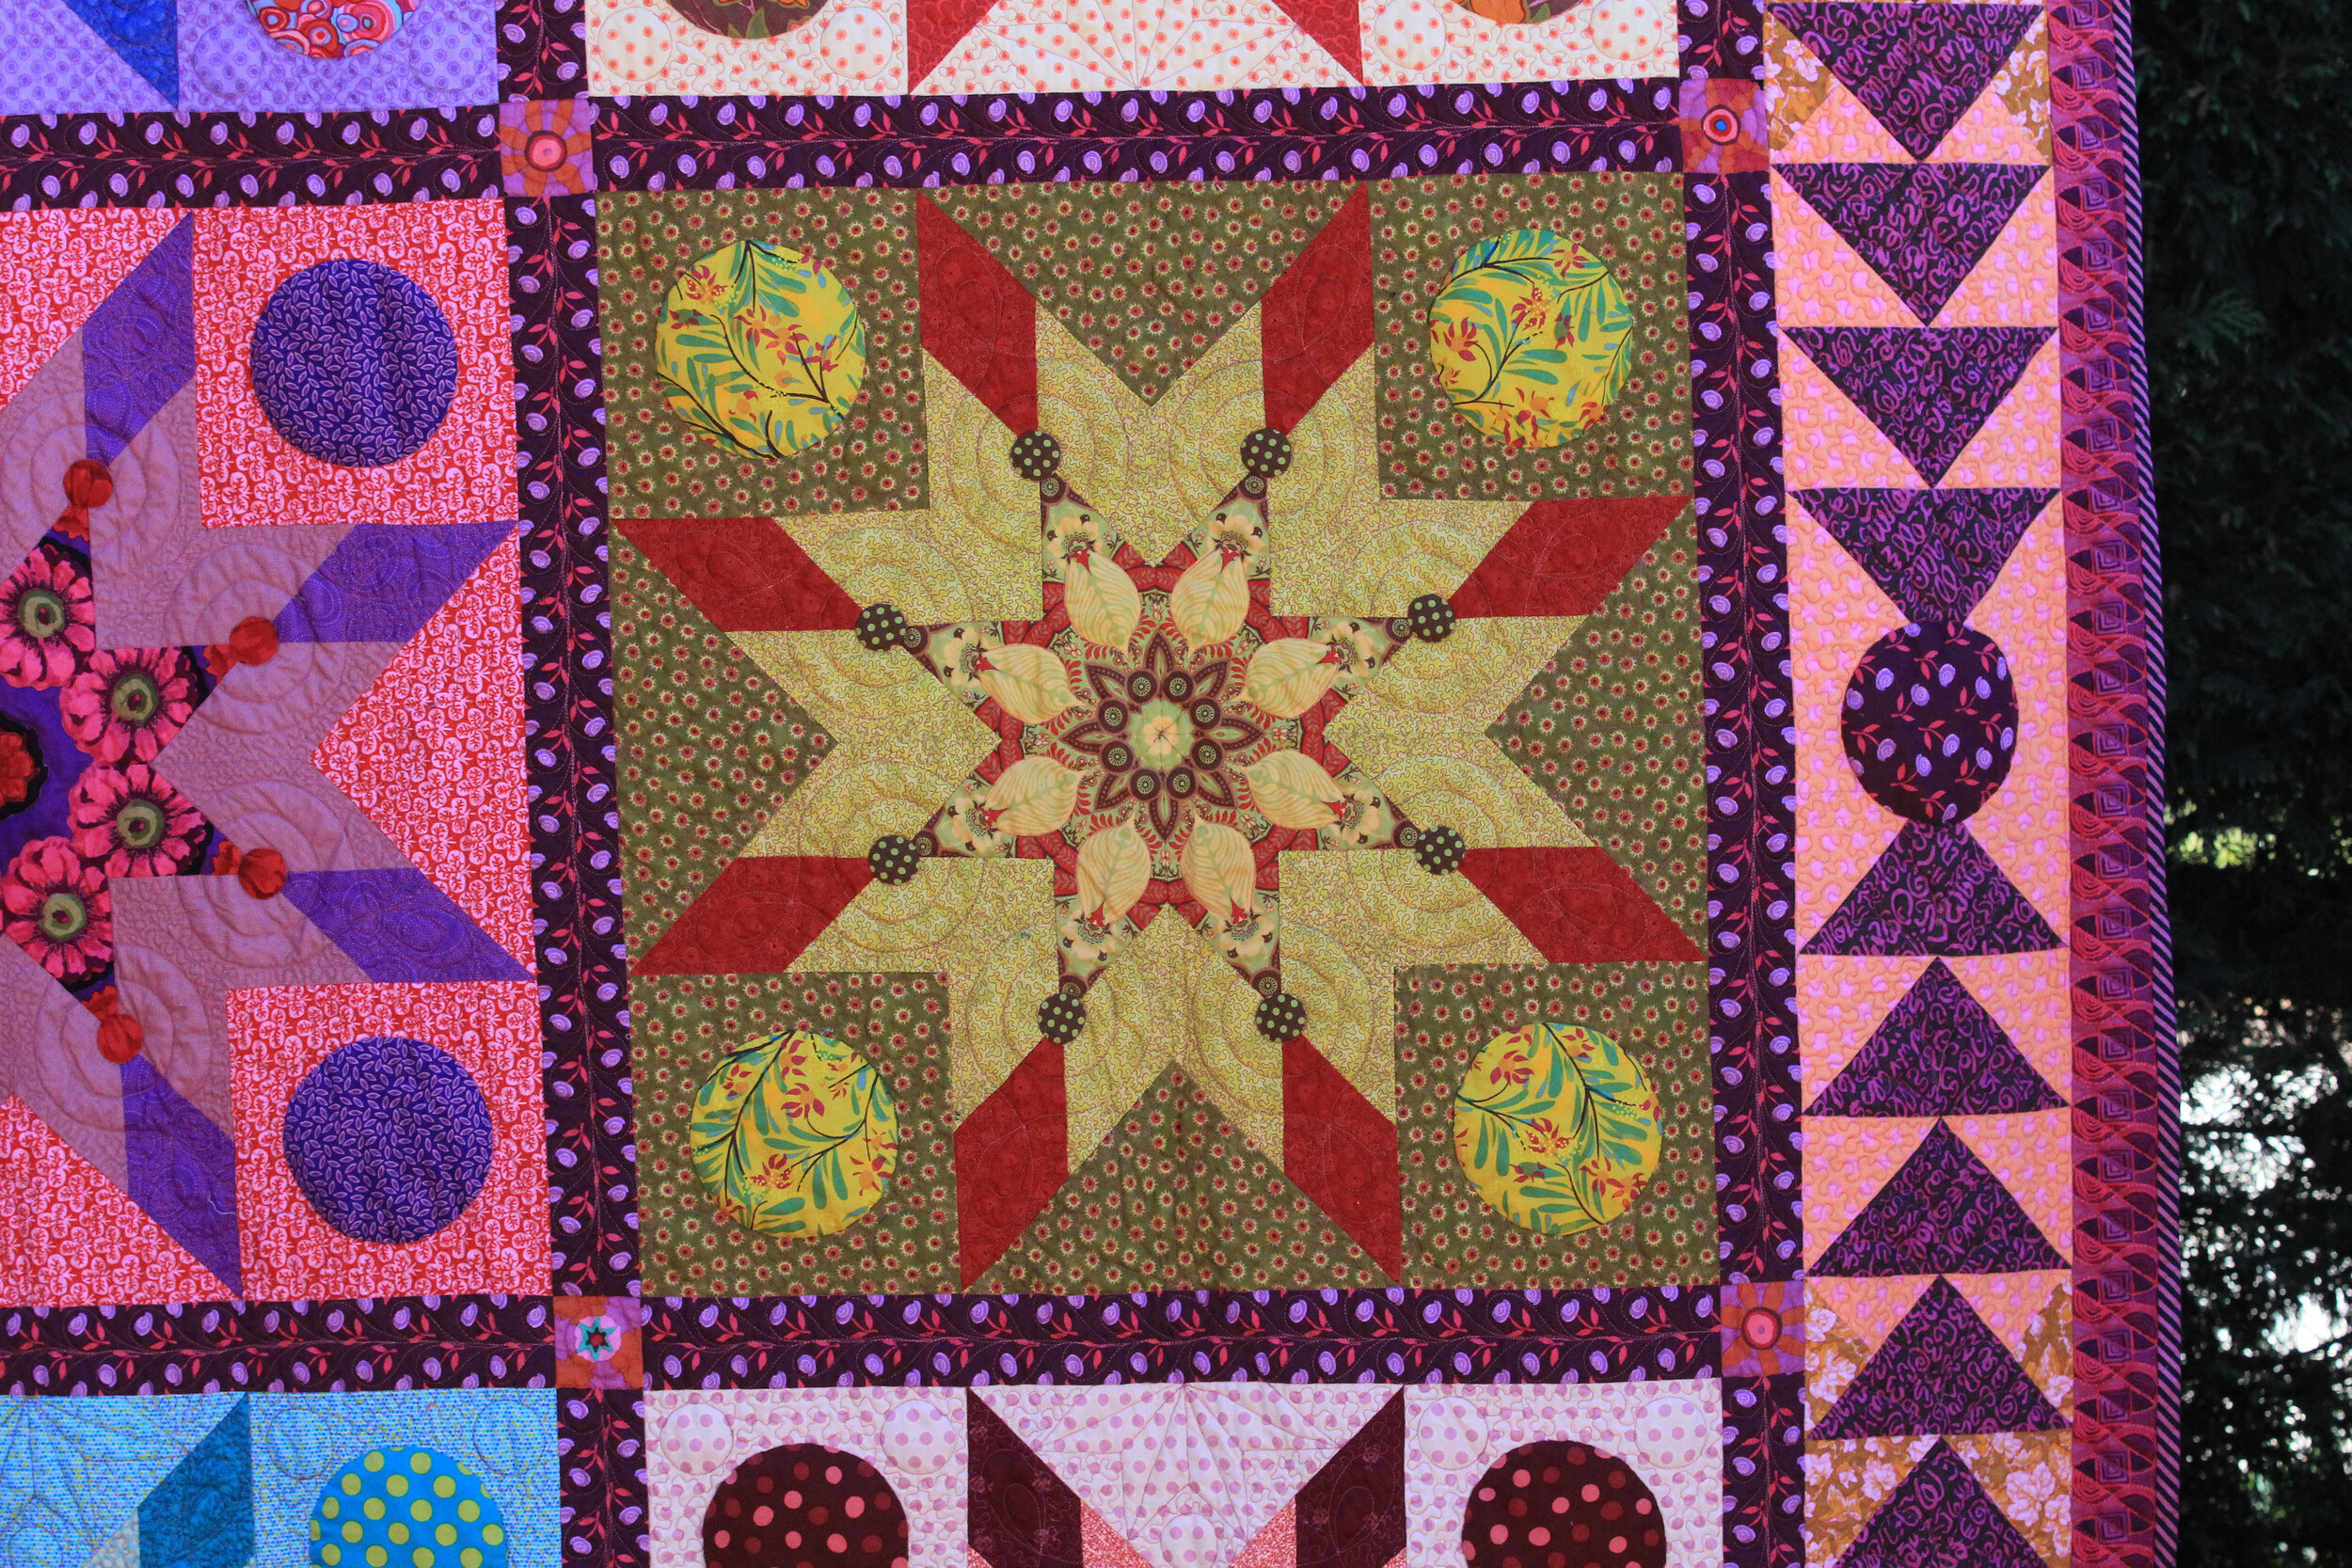 05aa2011-08-25 Quilts Harlequin Star_25z - Copy.jpg